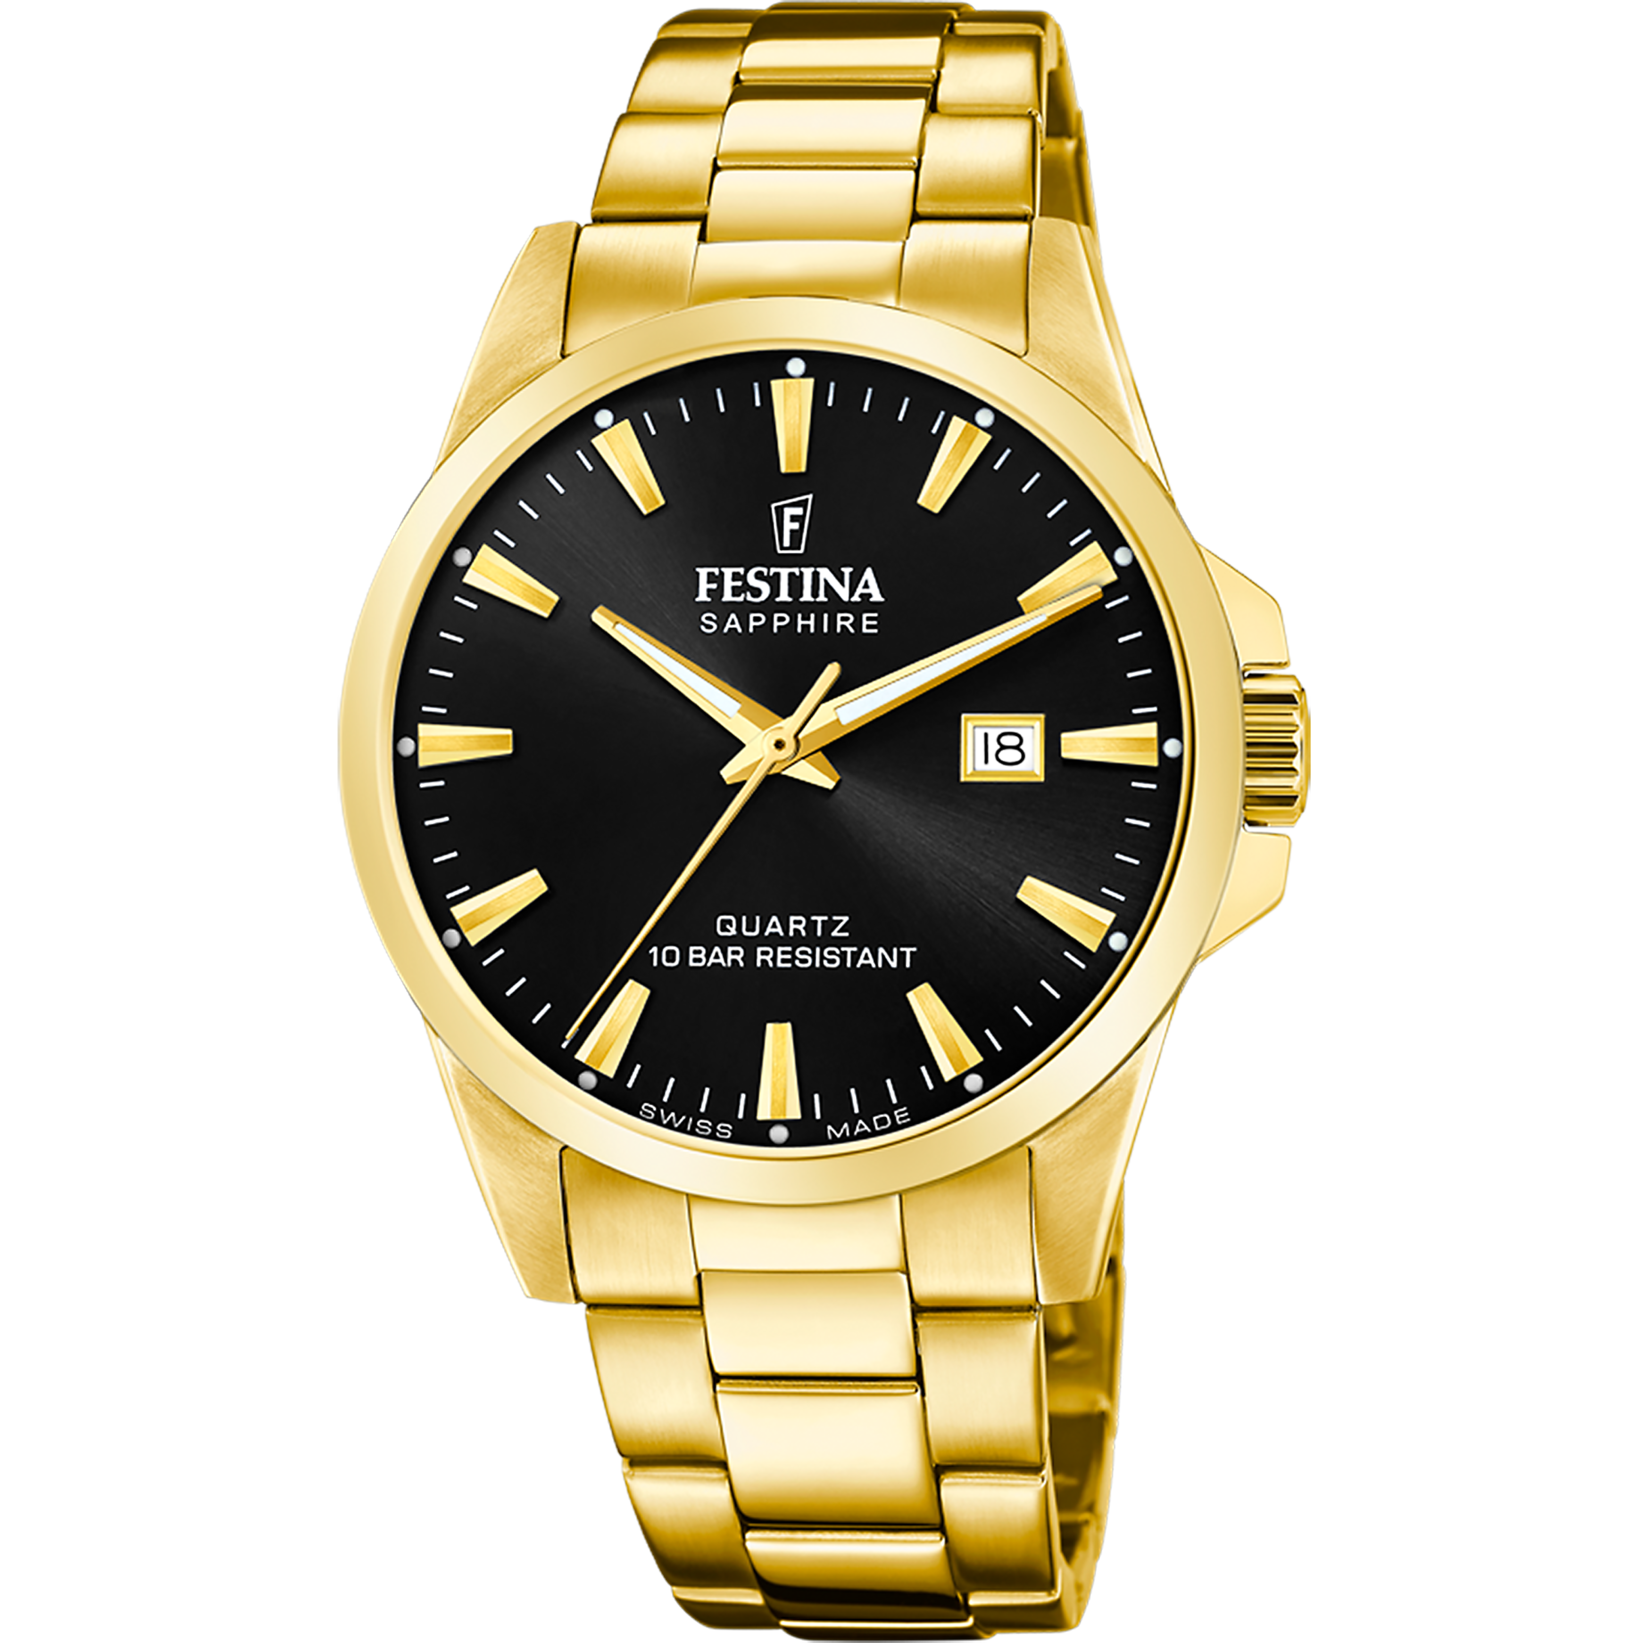 Festina Swiss Made F20044-6 - Analog - Strap Material Stainless Steel I Festina Watches USA